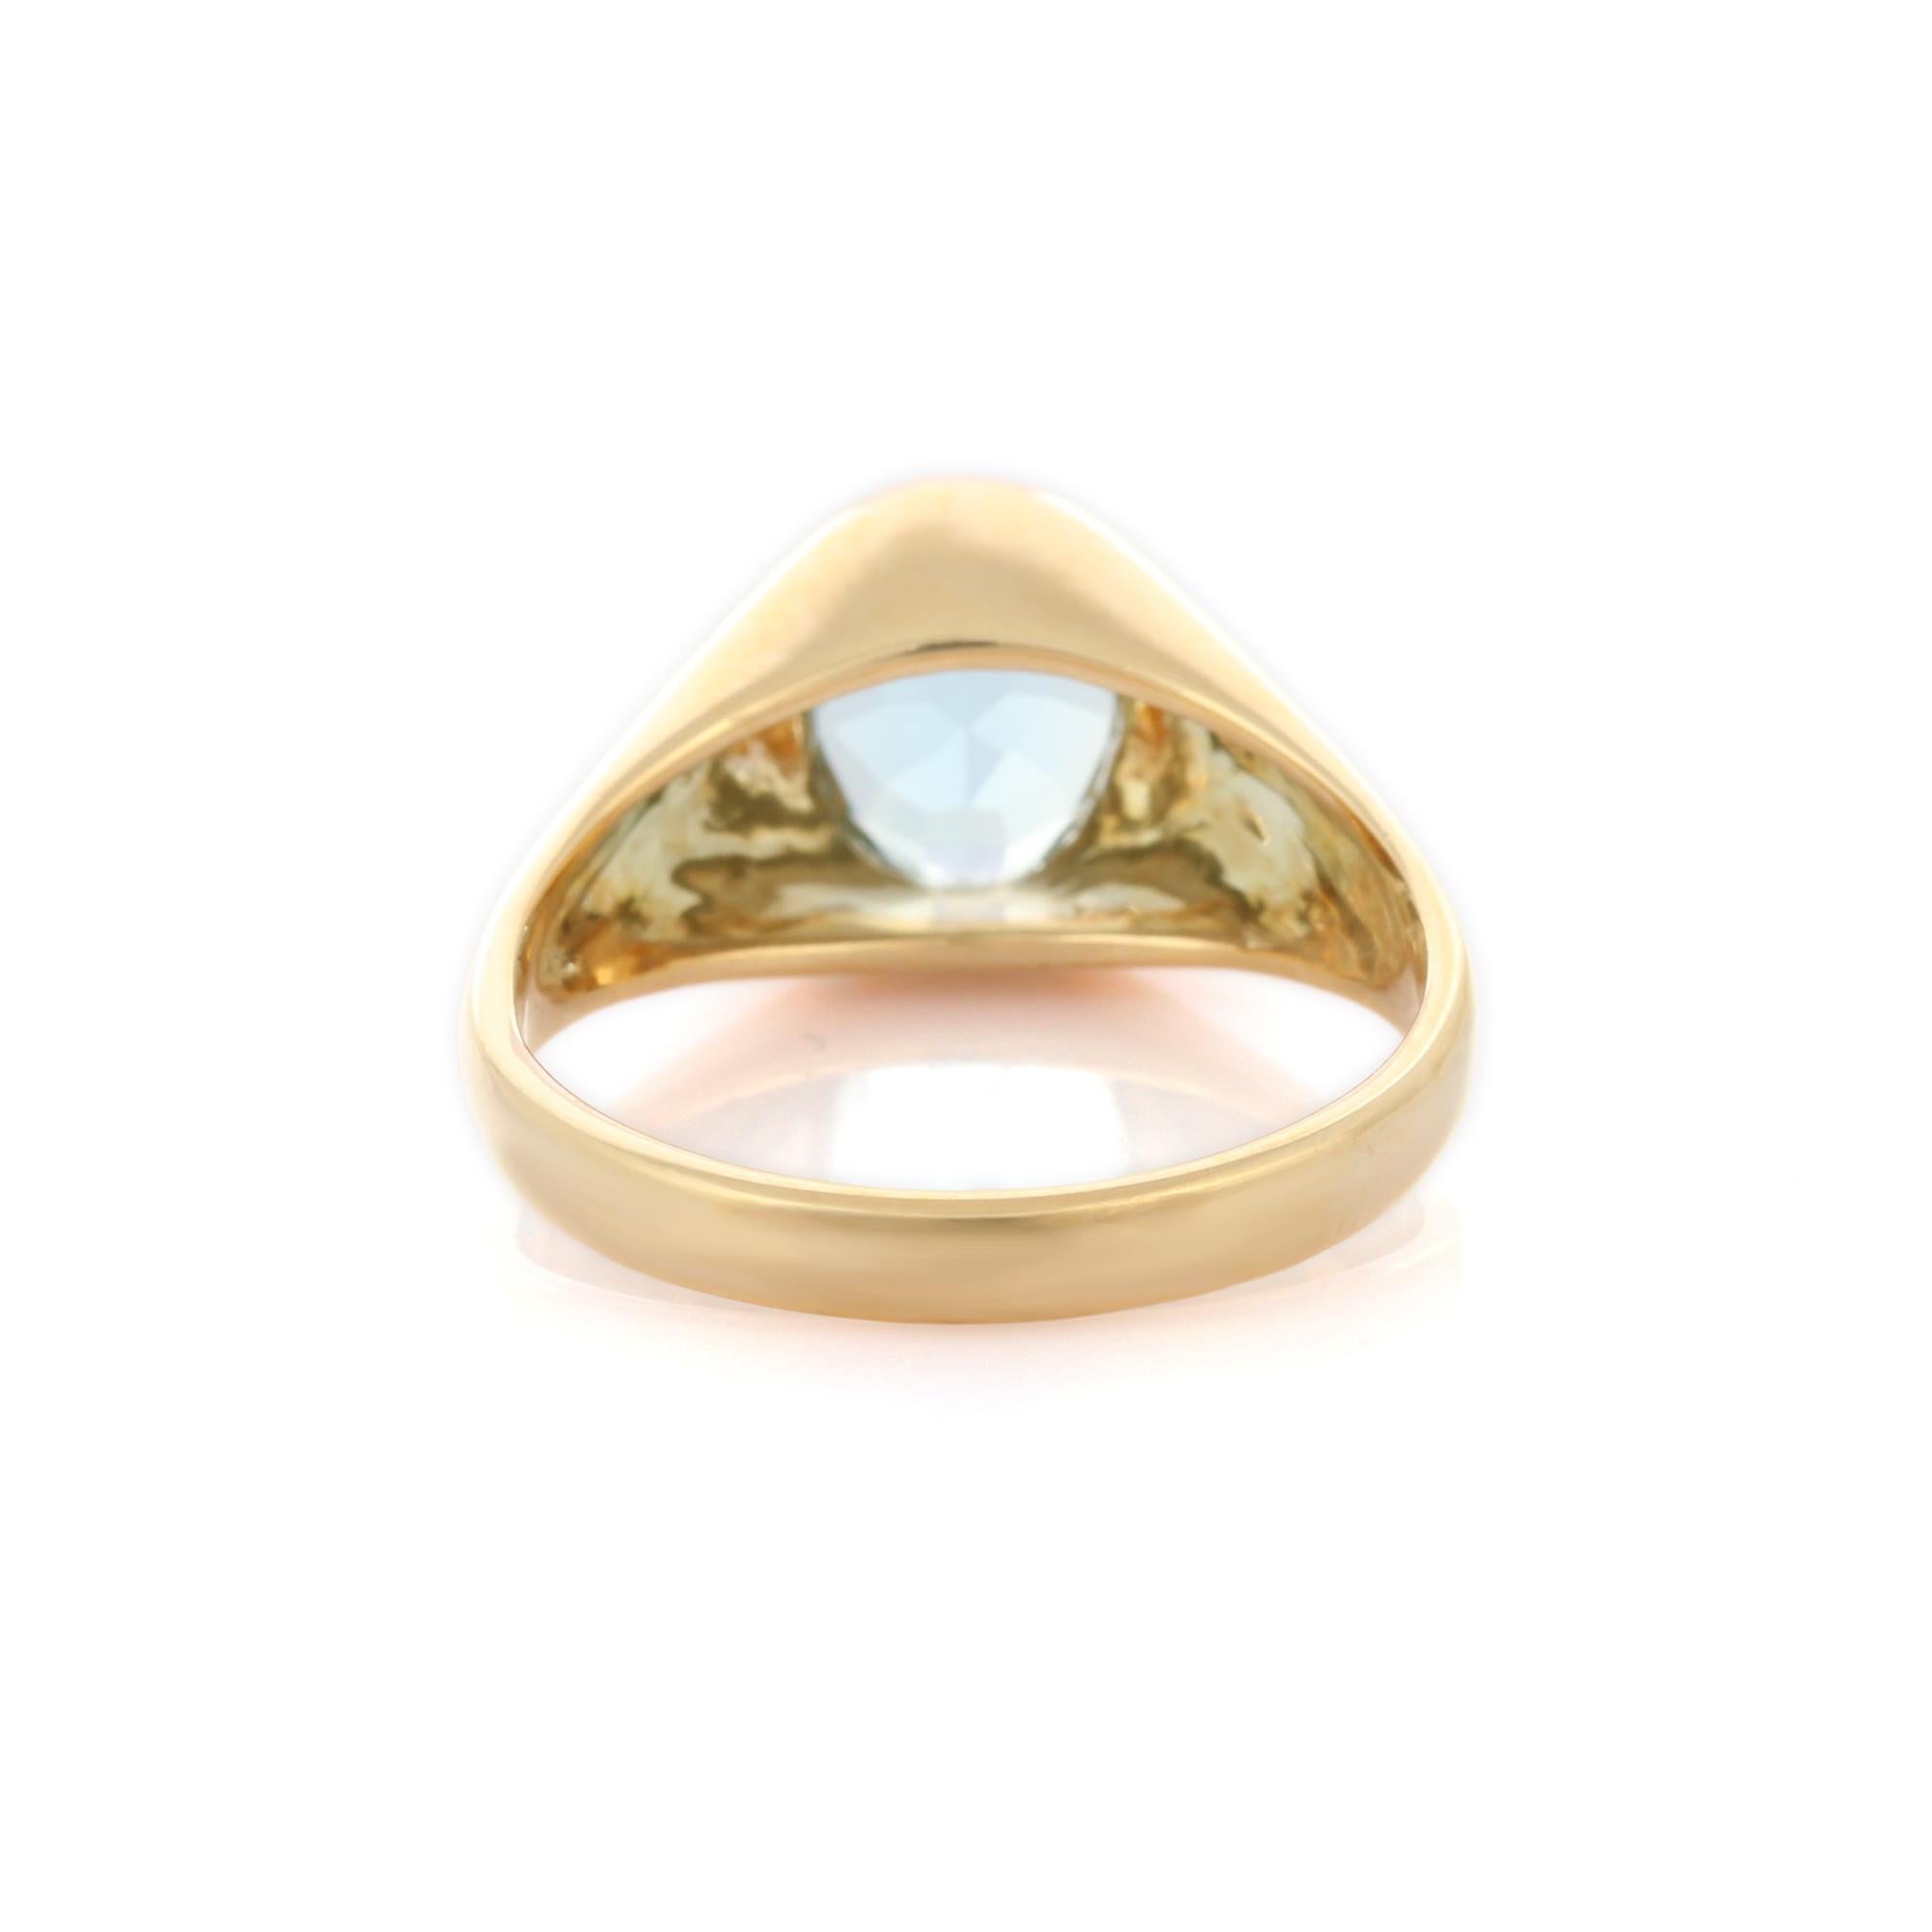 For Sale:  14K Yellow Gold 1.62 Carat Oval Cut Aquamarine Engagement Ring 5